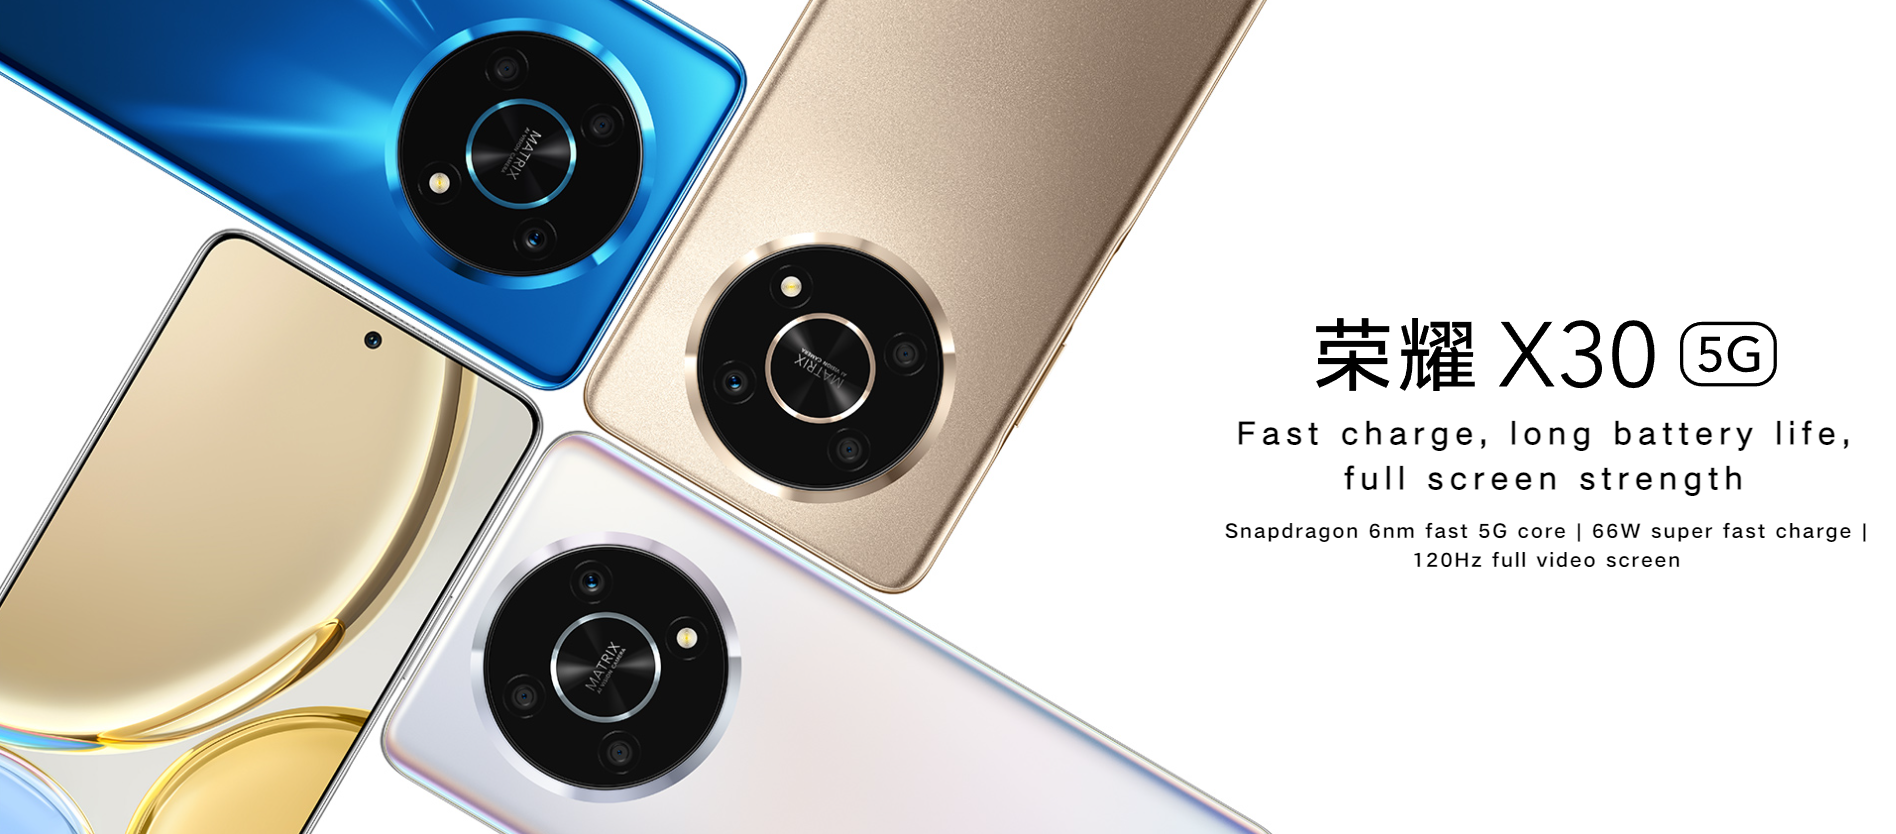 Honor X30 Announce - Snapdragon 695, 120Hz Display, 66W Charging And Up To 12GB RAM Starting From $ 235